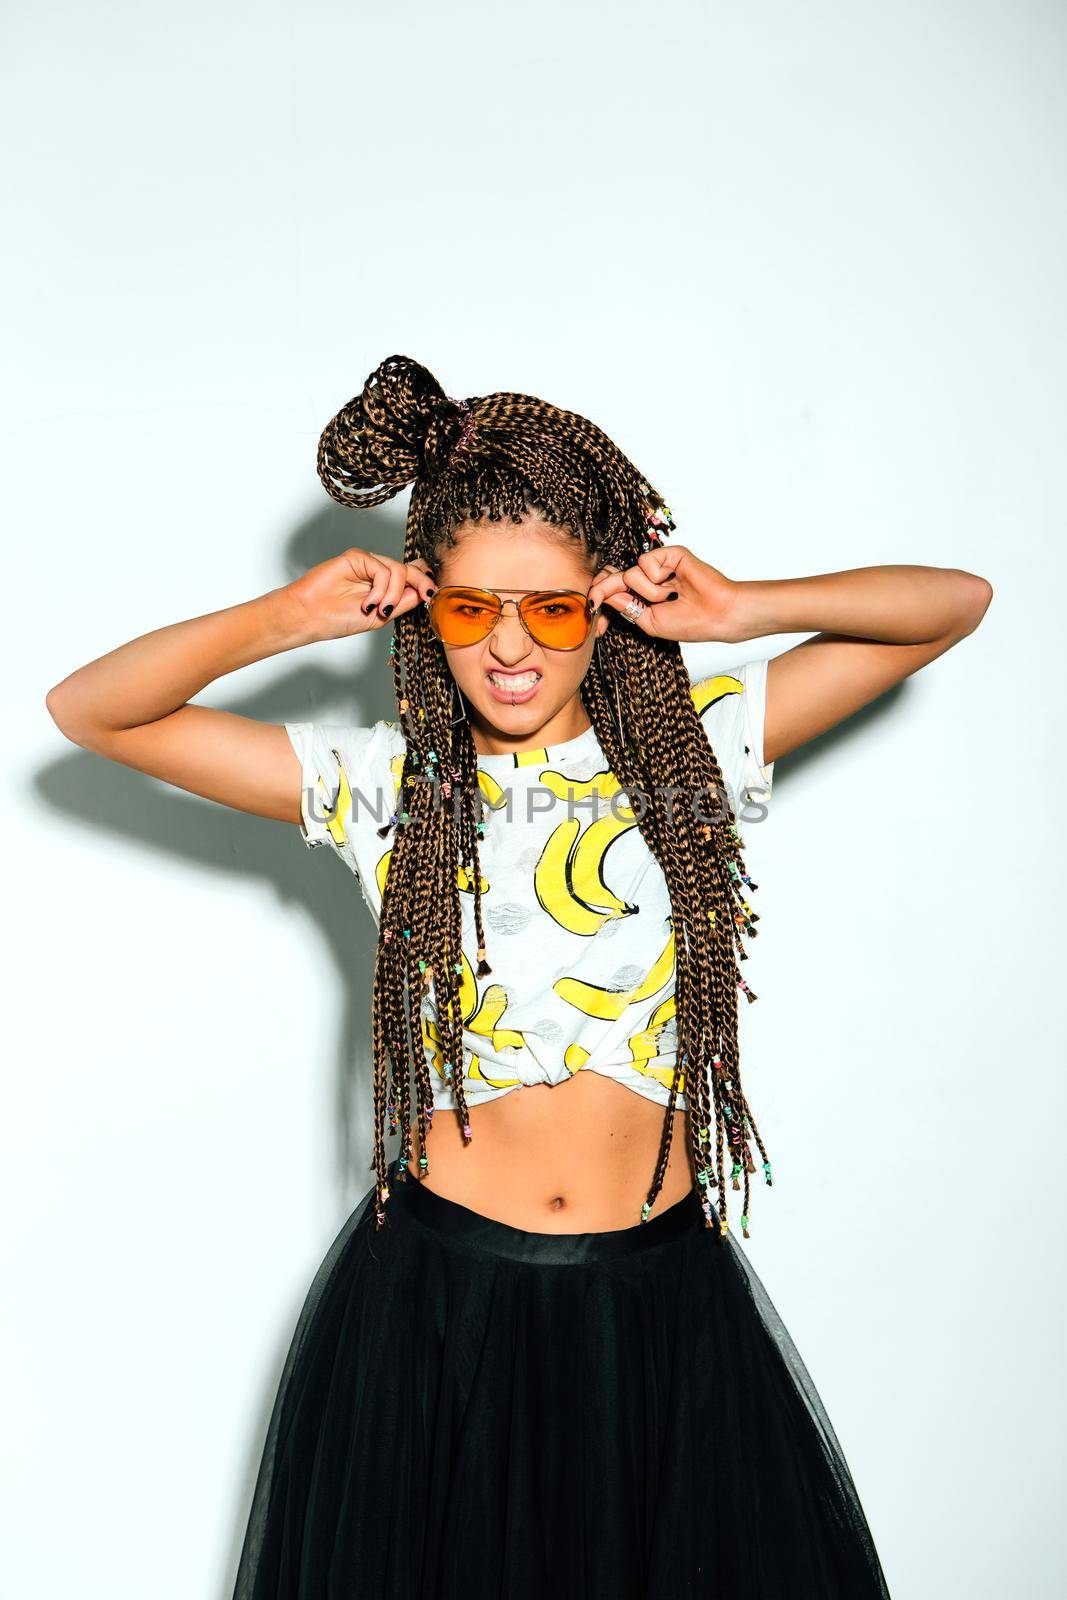 Portrait of a young stylish woman with braided hair dressed in white t-shirt, black skirt and yellow sunglasses on the white background.